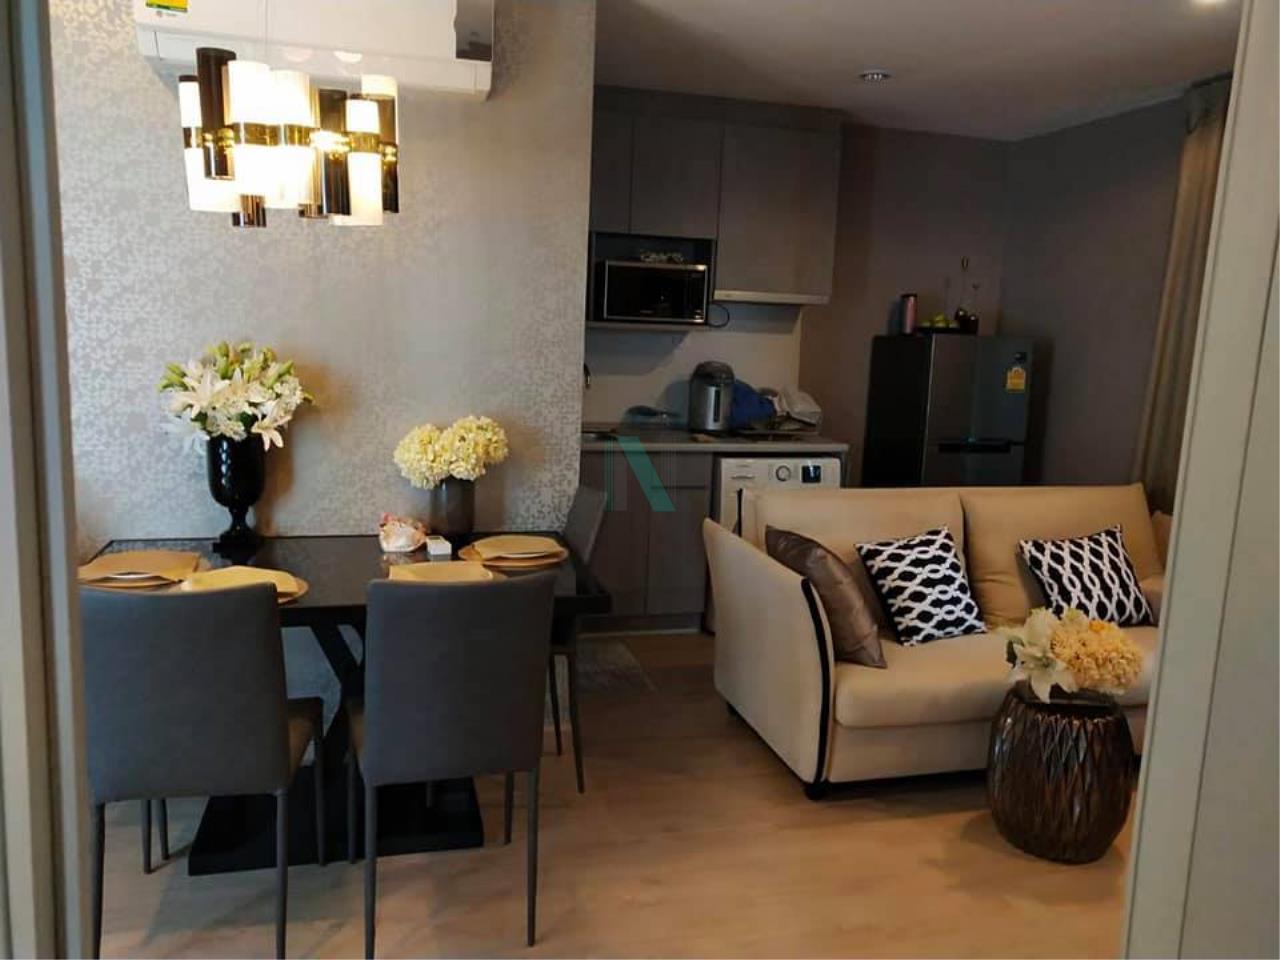 Sale IDEO WUTTHAKAT 45 sqm 2 bedrooms 30th floor near BTS Wutthakat The, ภาพที่ 4